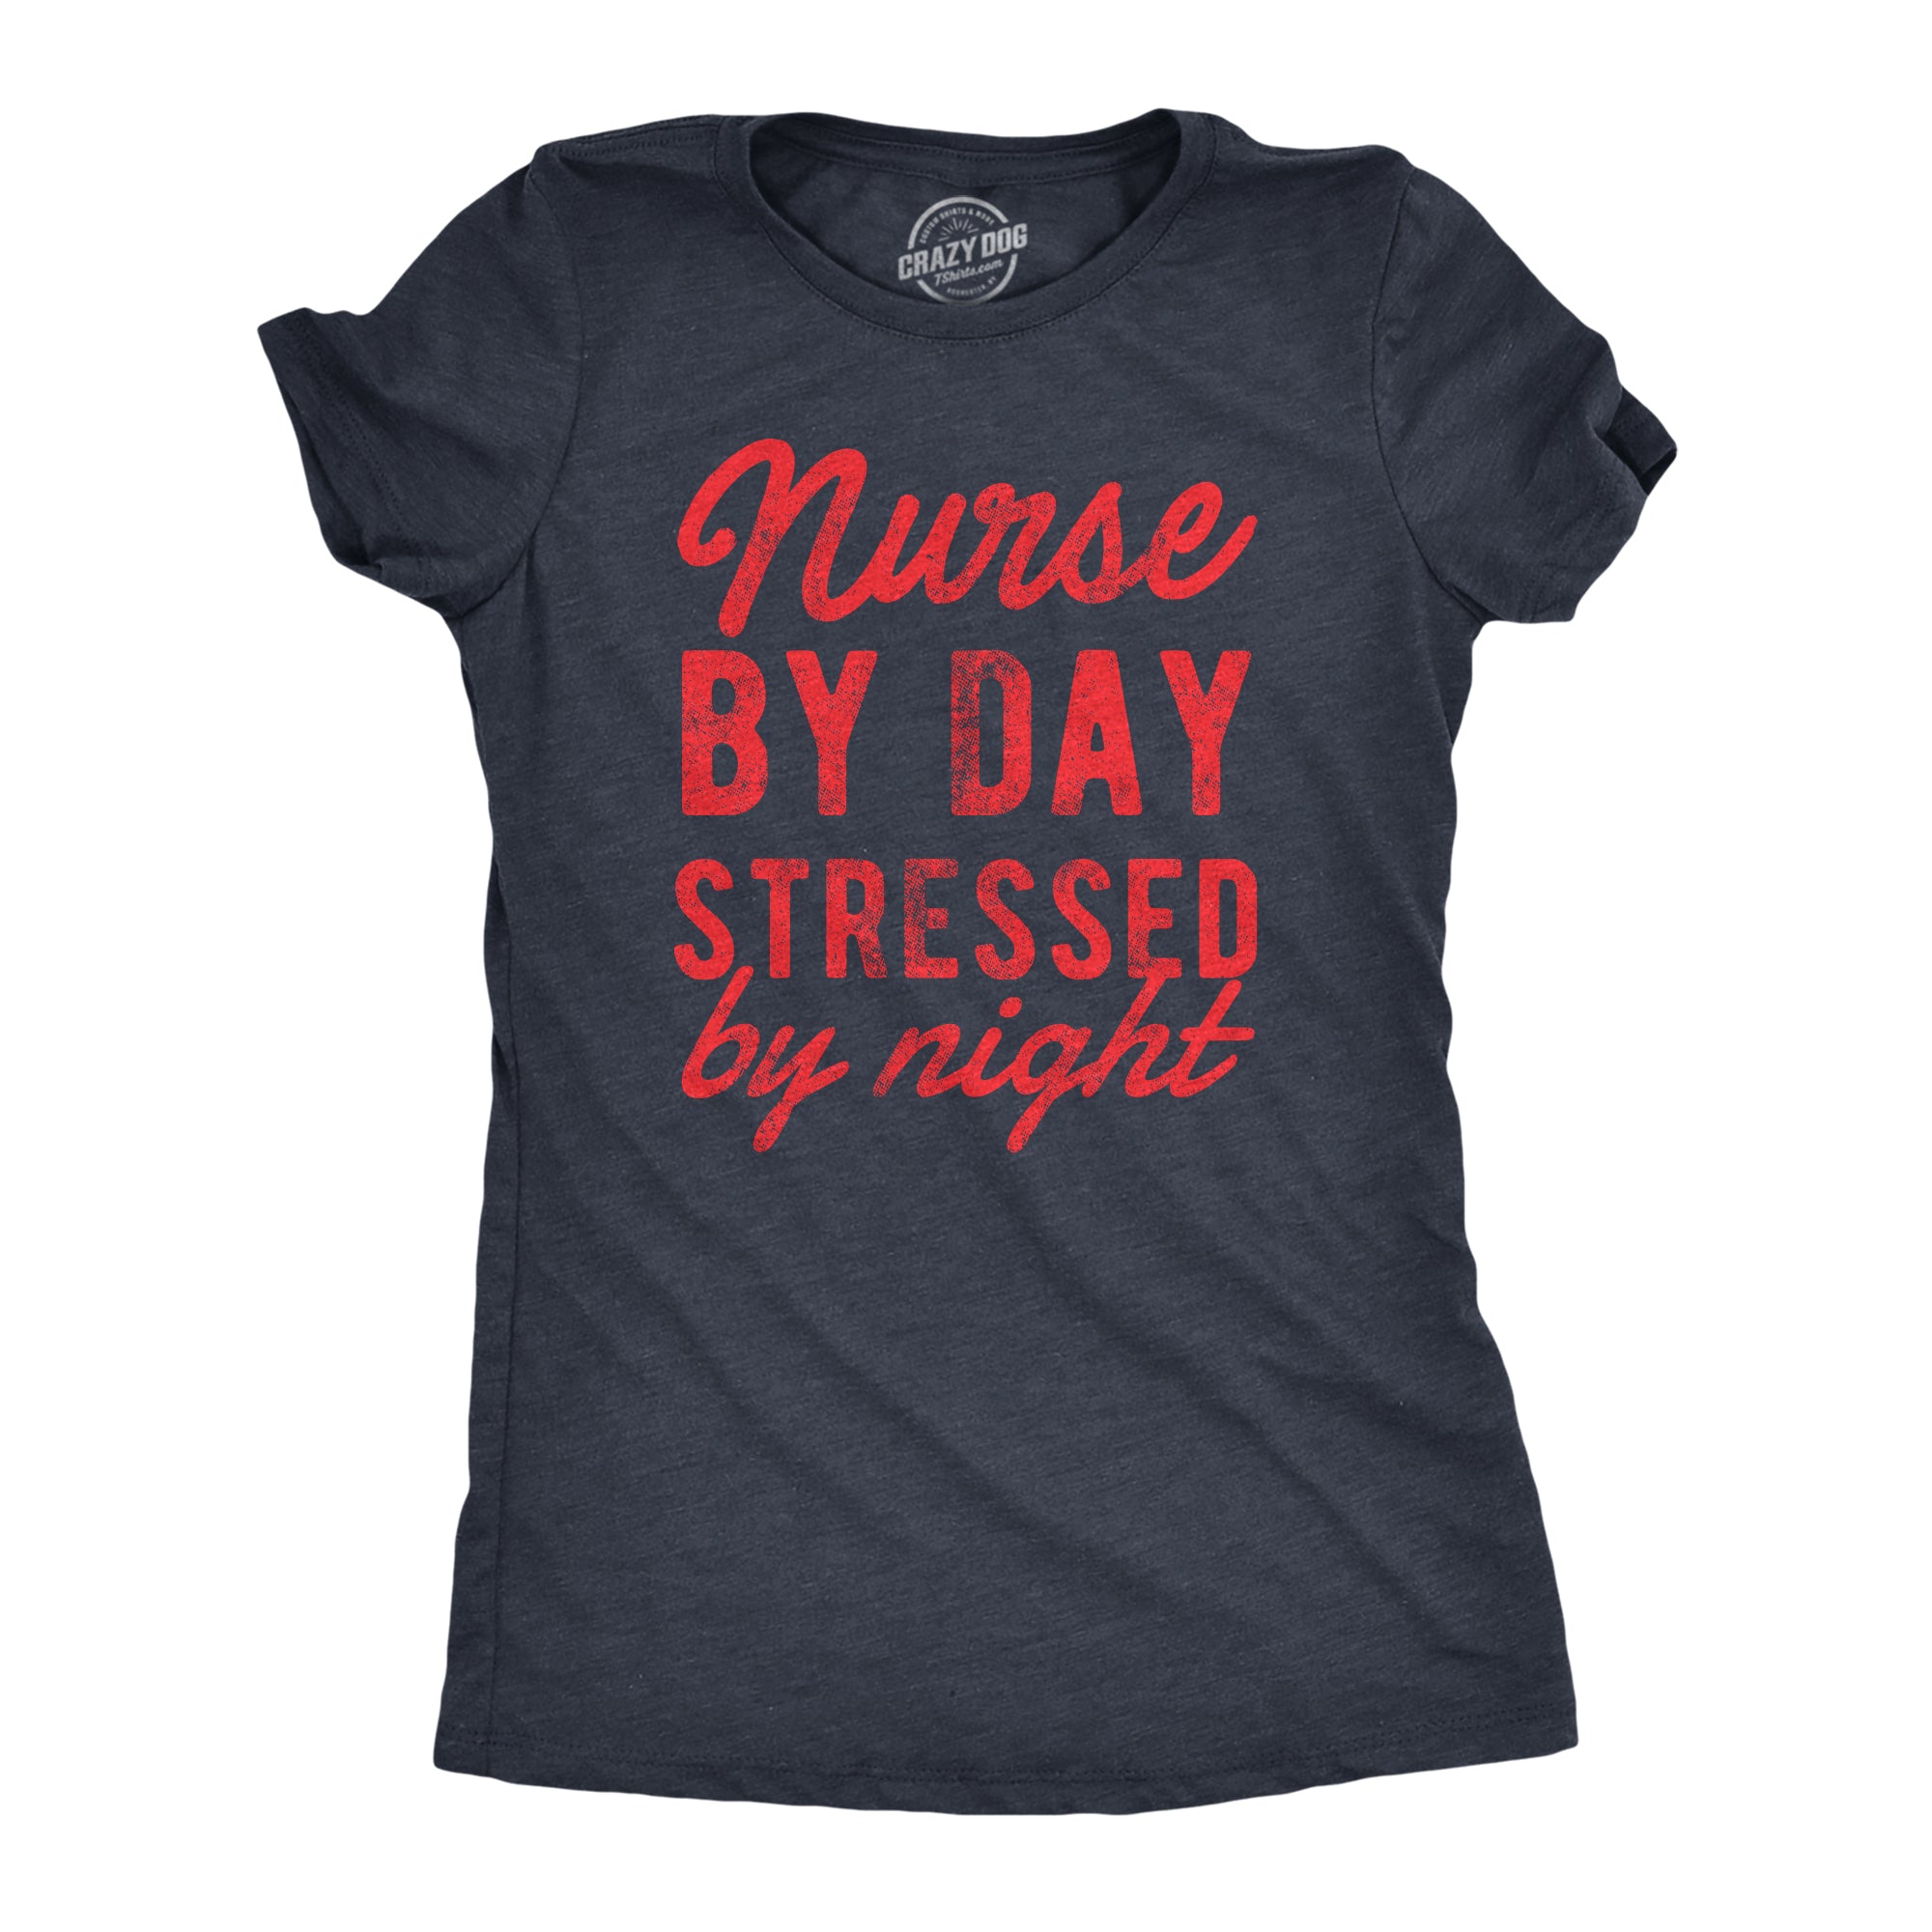 Funny Heather Navy - NURSE Nurse By Day Stressed By Night Womens T Shirt Nerdy Sarcastic Tee